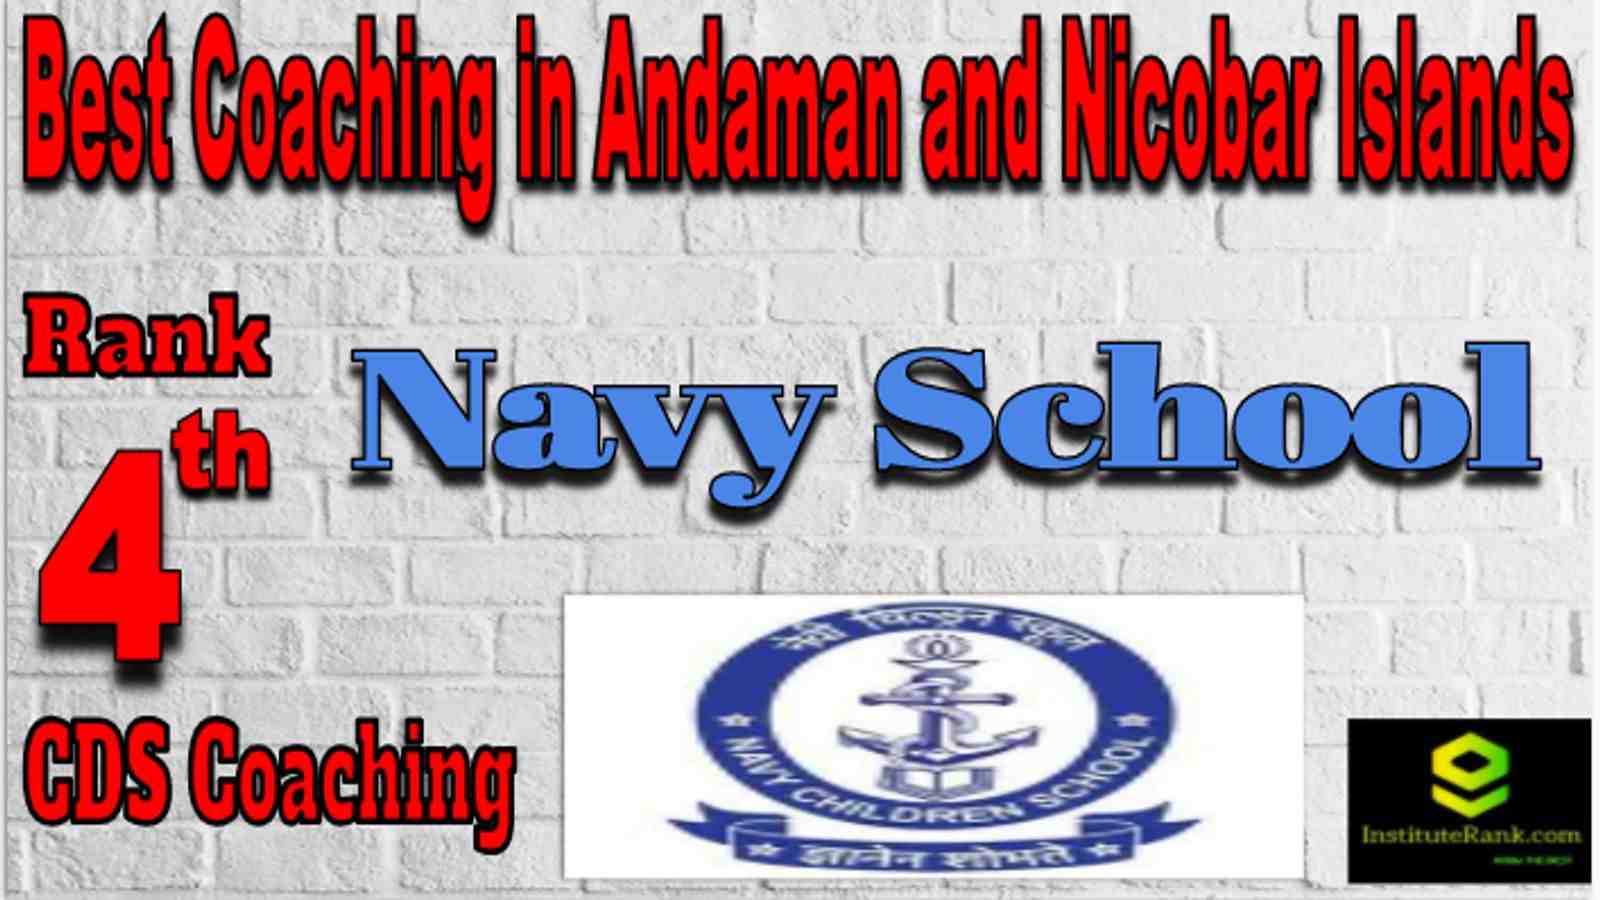 Rank 4 Best CDS Coaching in Andaman and Nicobar islands